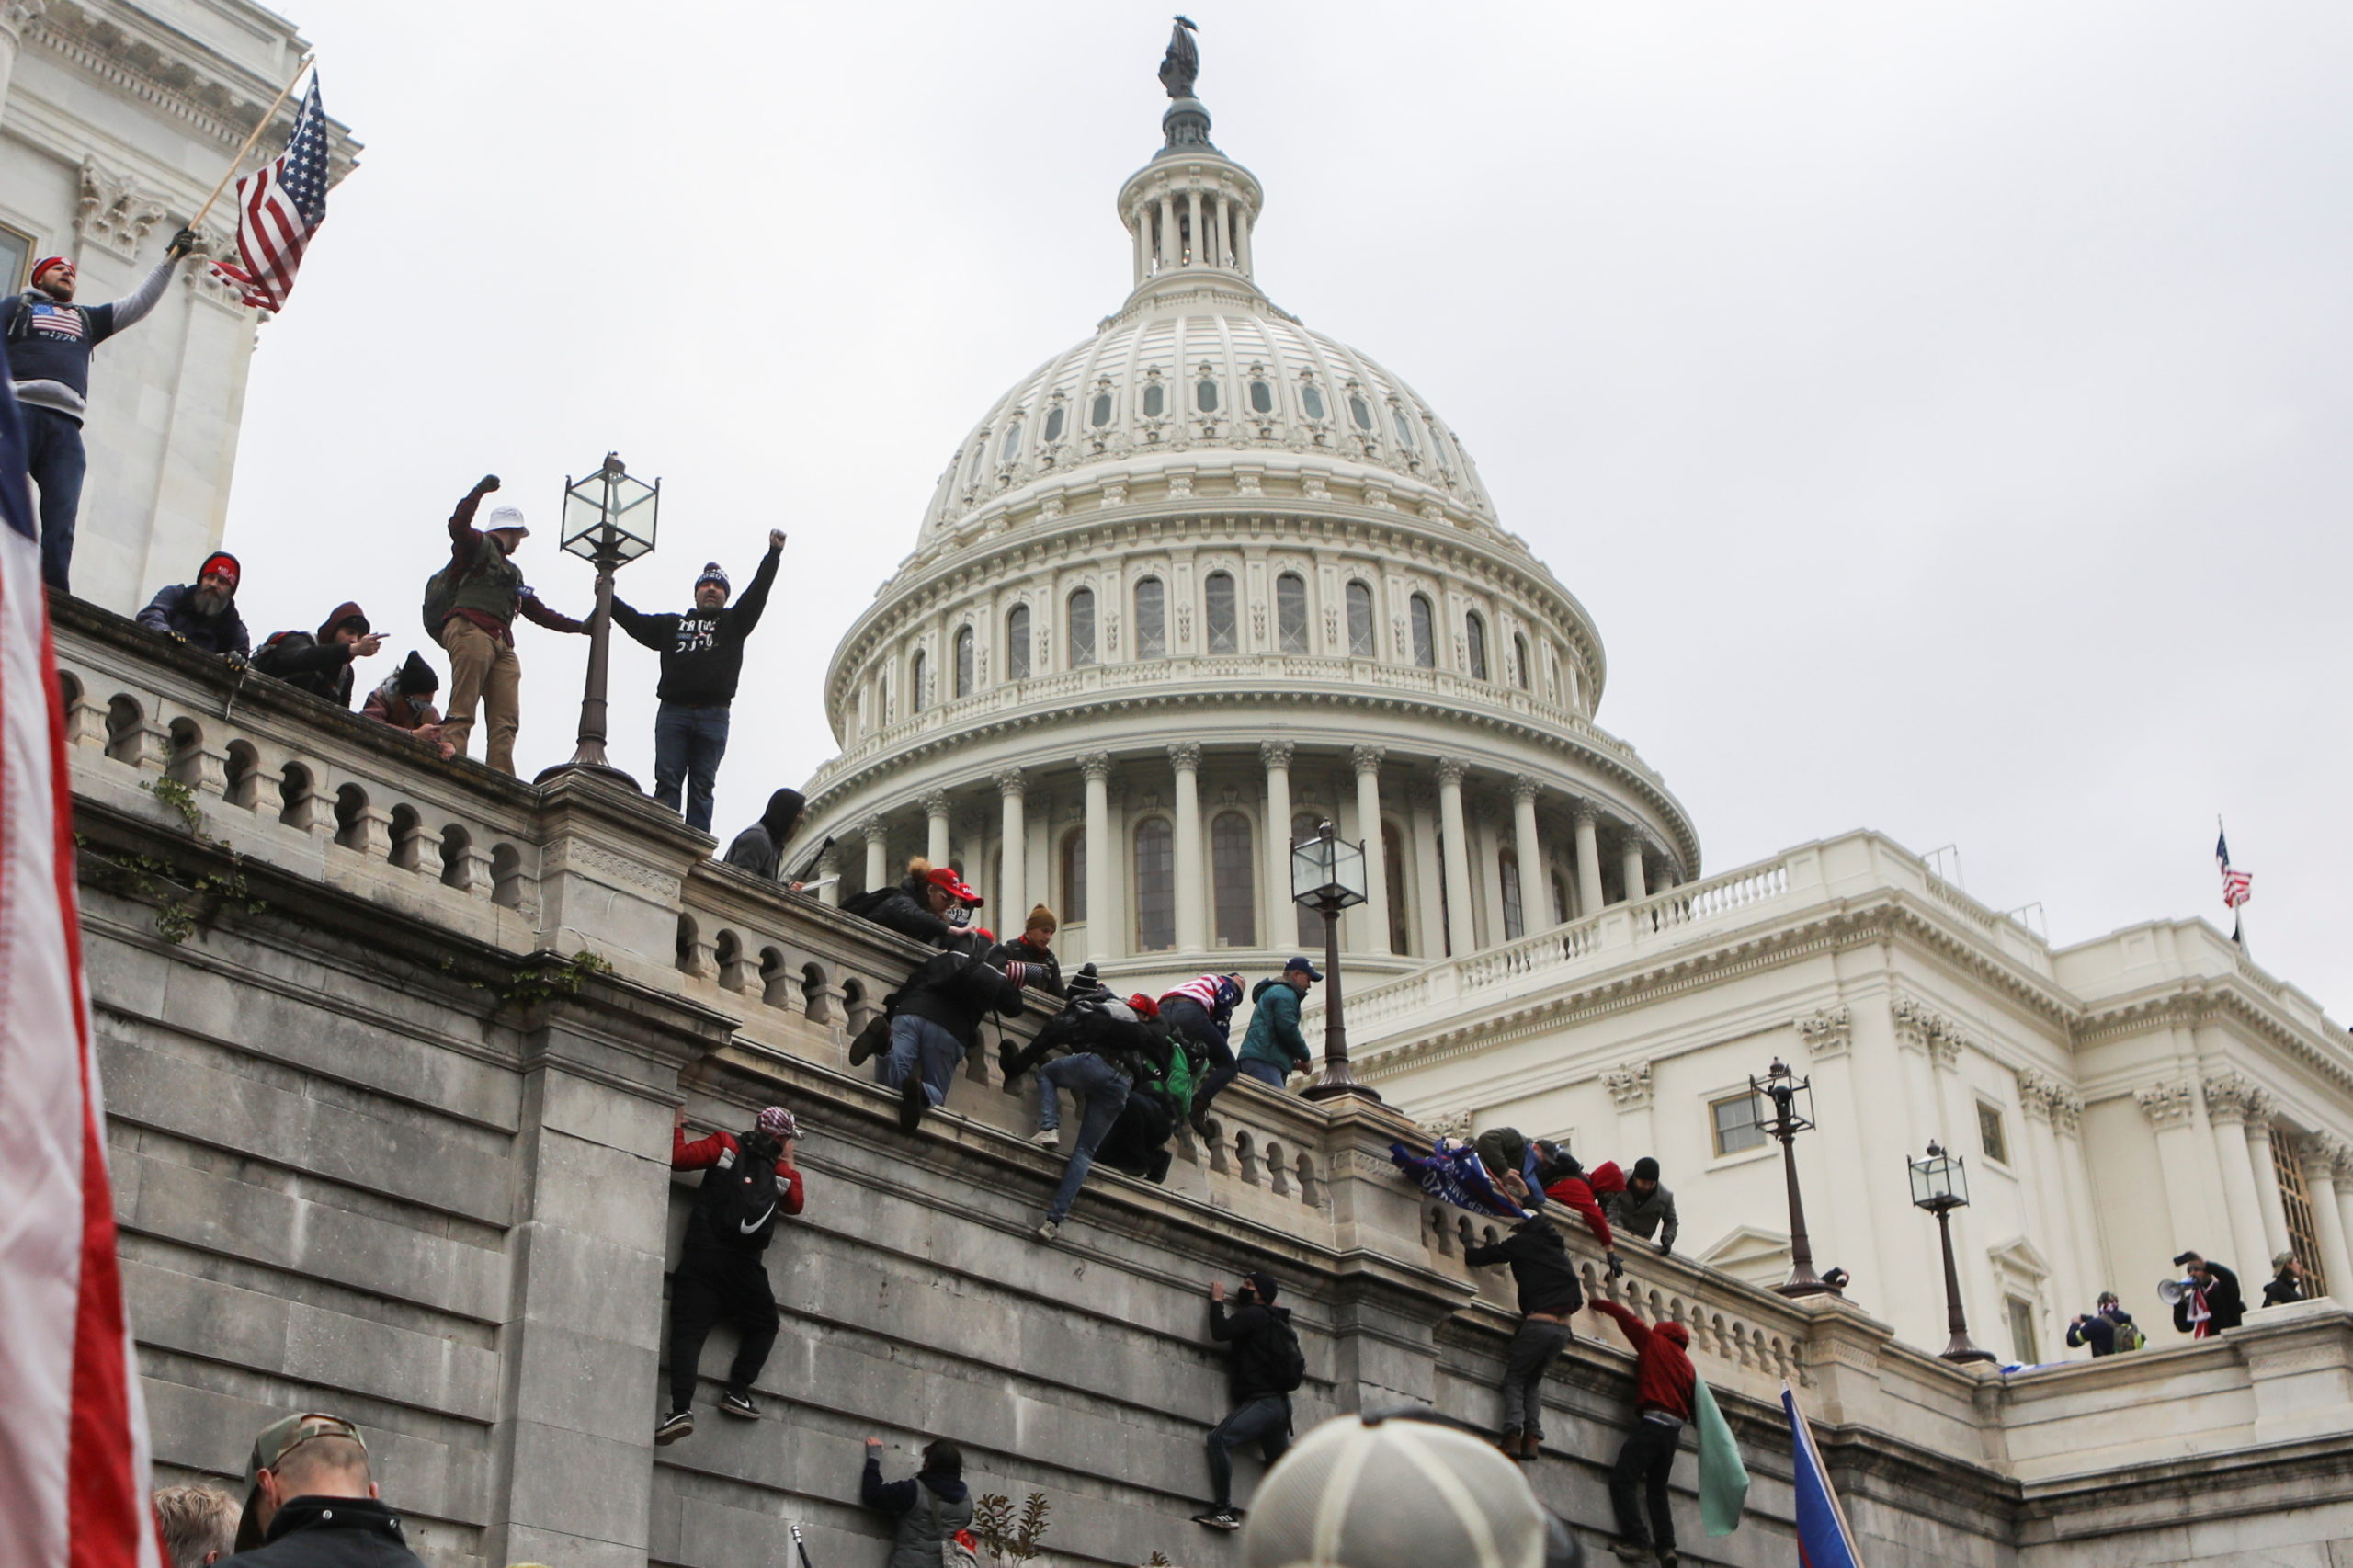 World stunned by violence in U.S. Capitol, attempts to overturn election |  Inquirer News